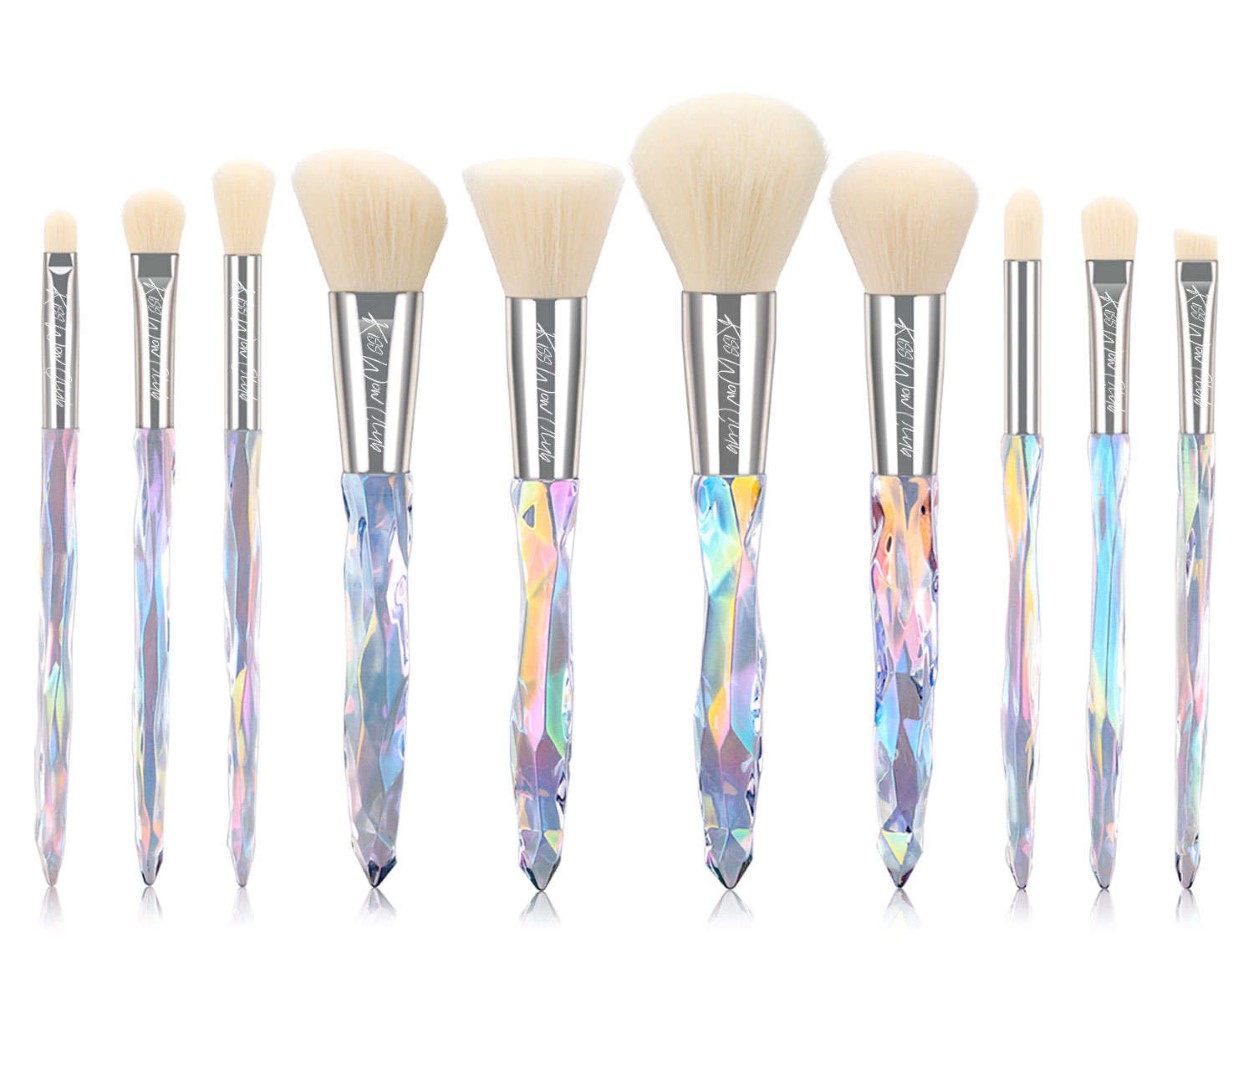 Kiss Wow Club Holographic Crystal White Makeup Brush Set 1 (Large)